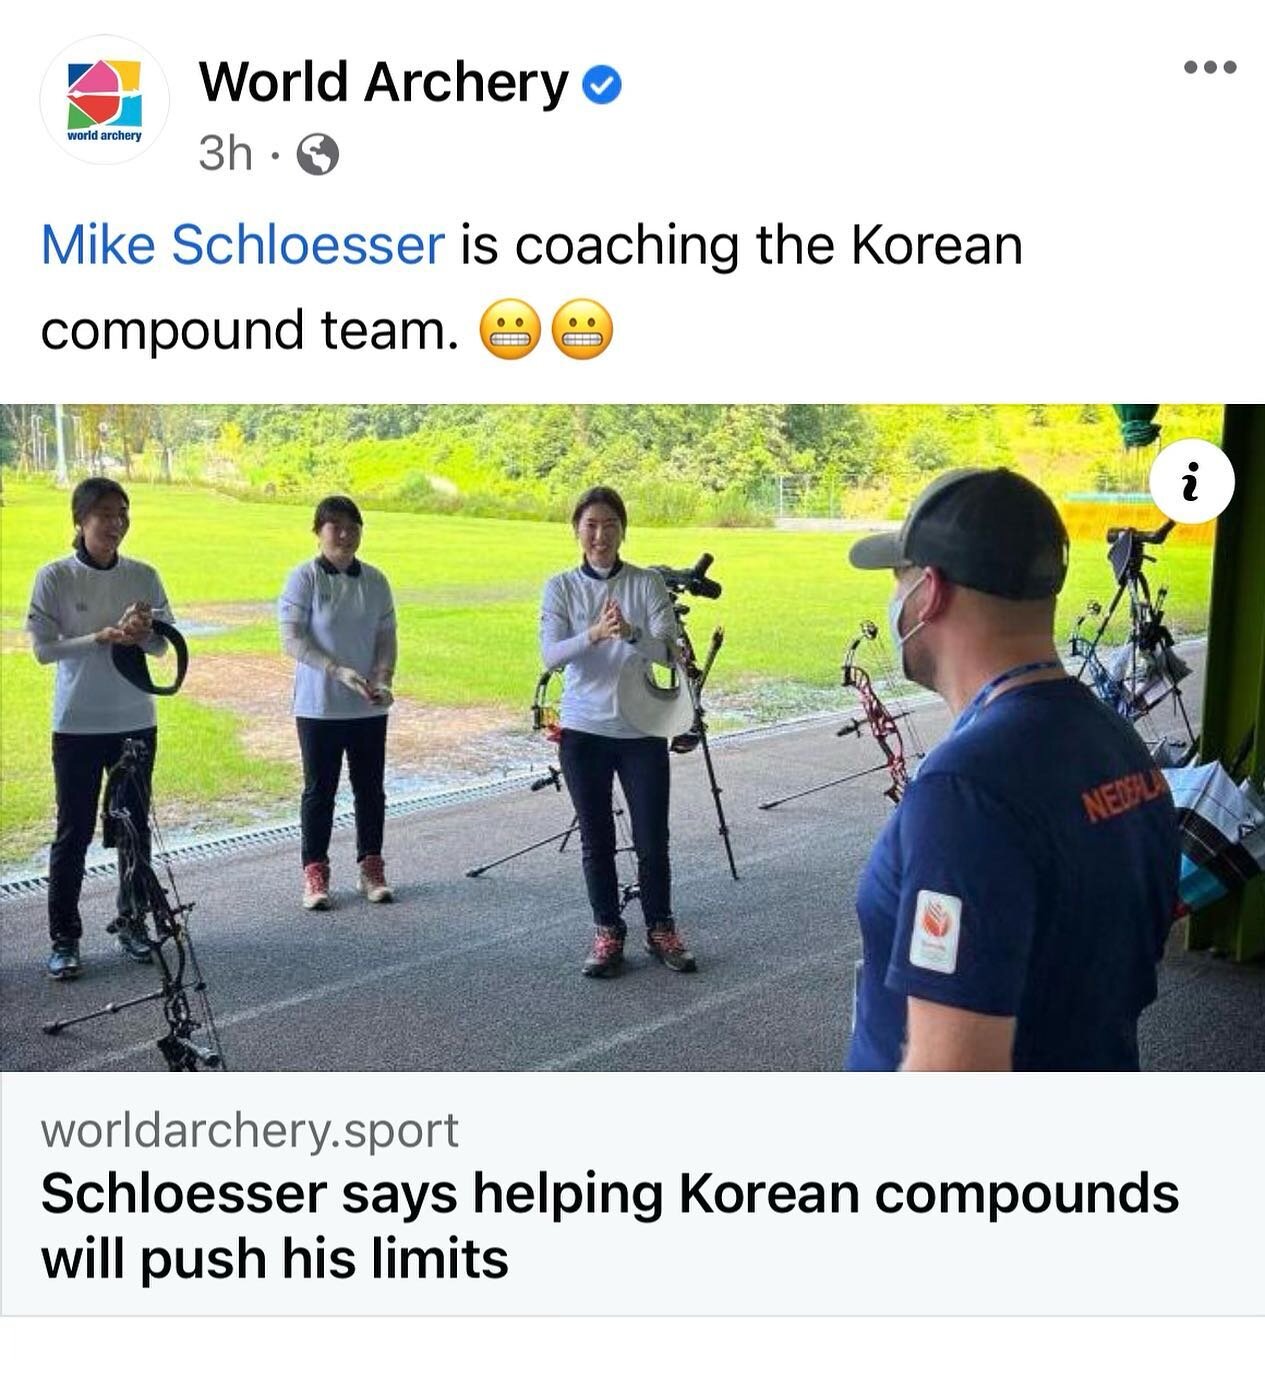 Hey! @worldarchery it&rsquo;s not April 1st yet.  Don&rsquo;t spend all good jokes early.